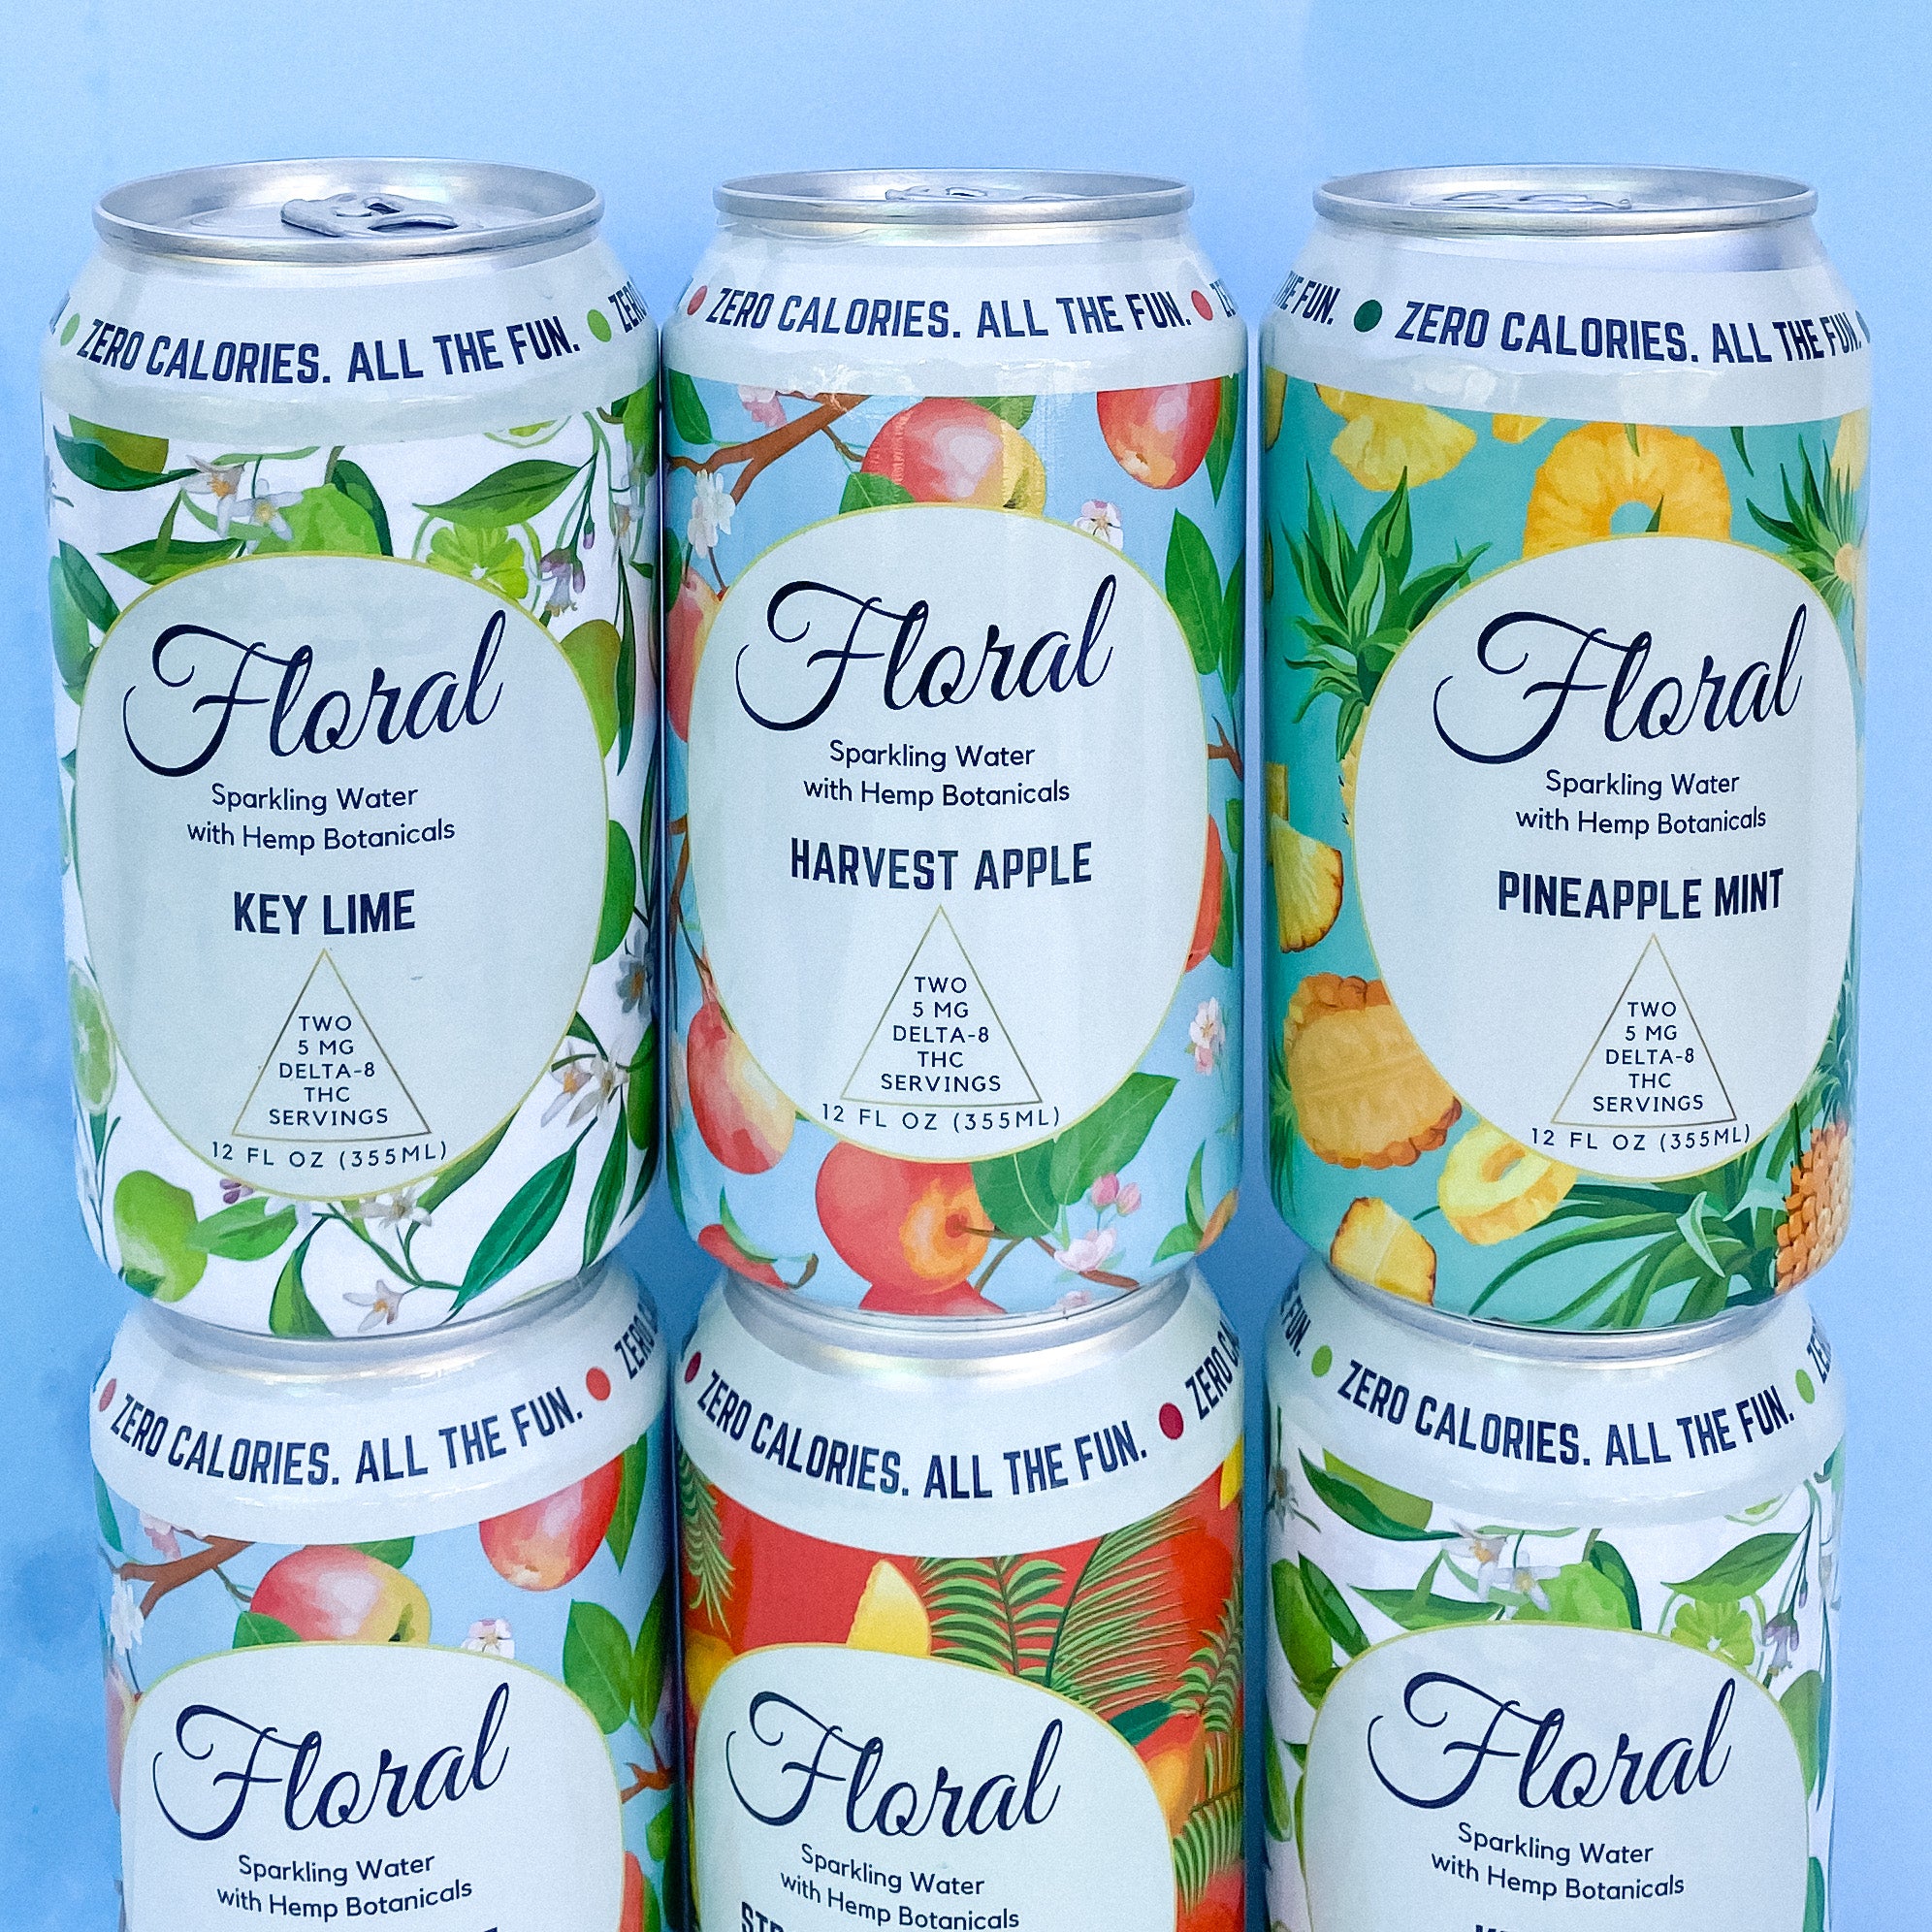 Floral Beverage's THC-infused sparkling water cans stacked on top of each other.